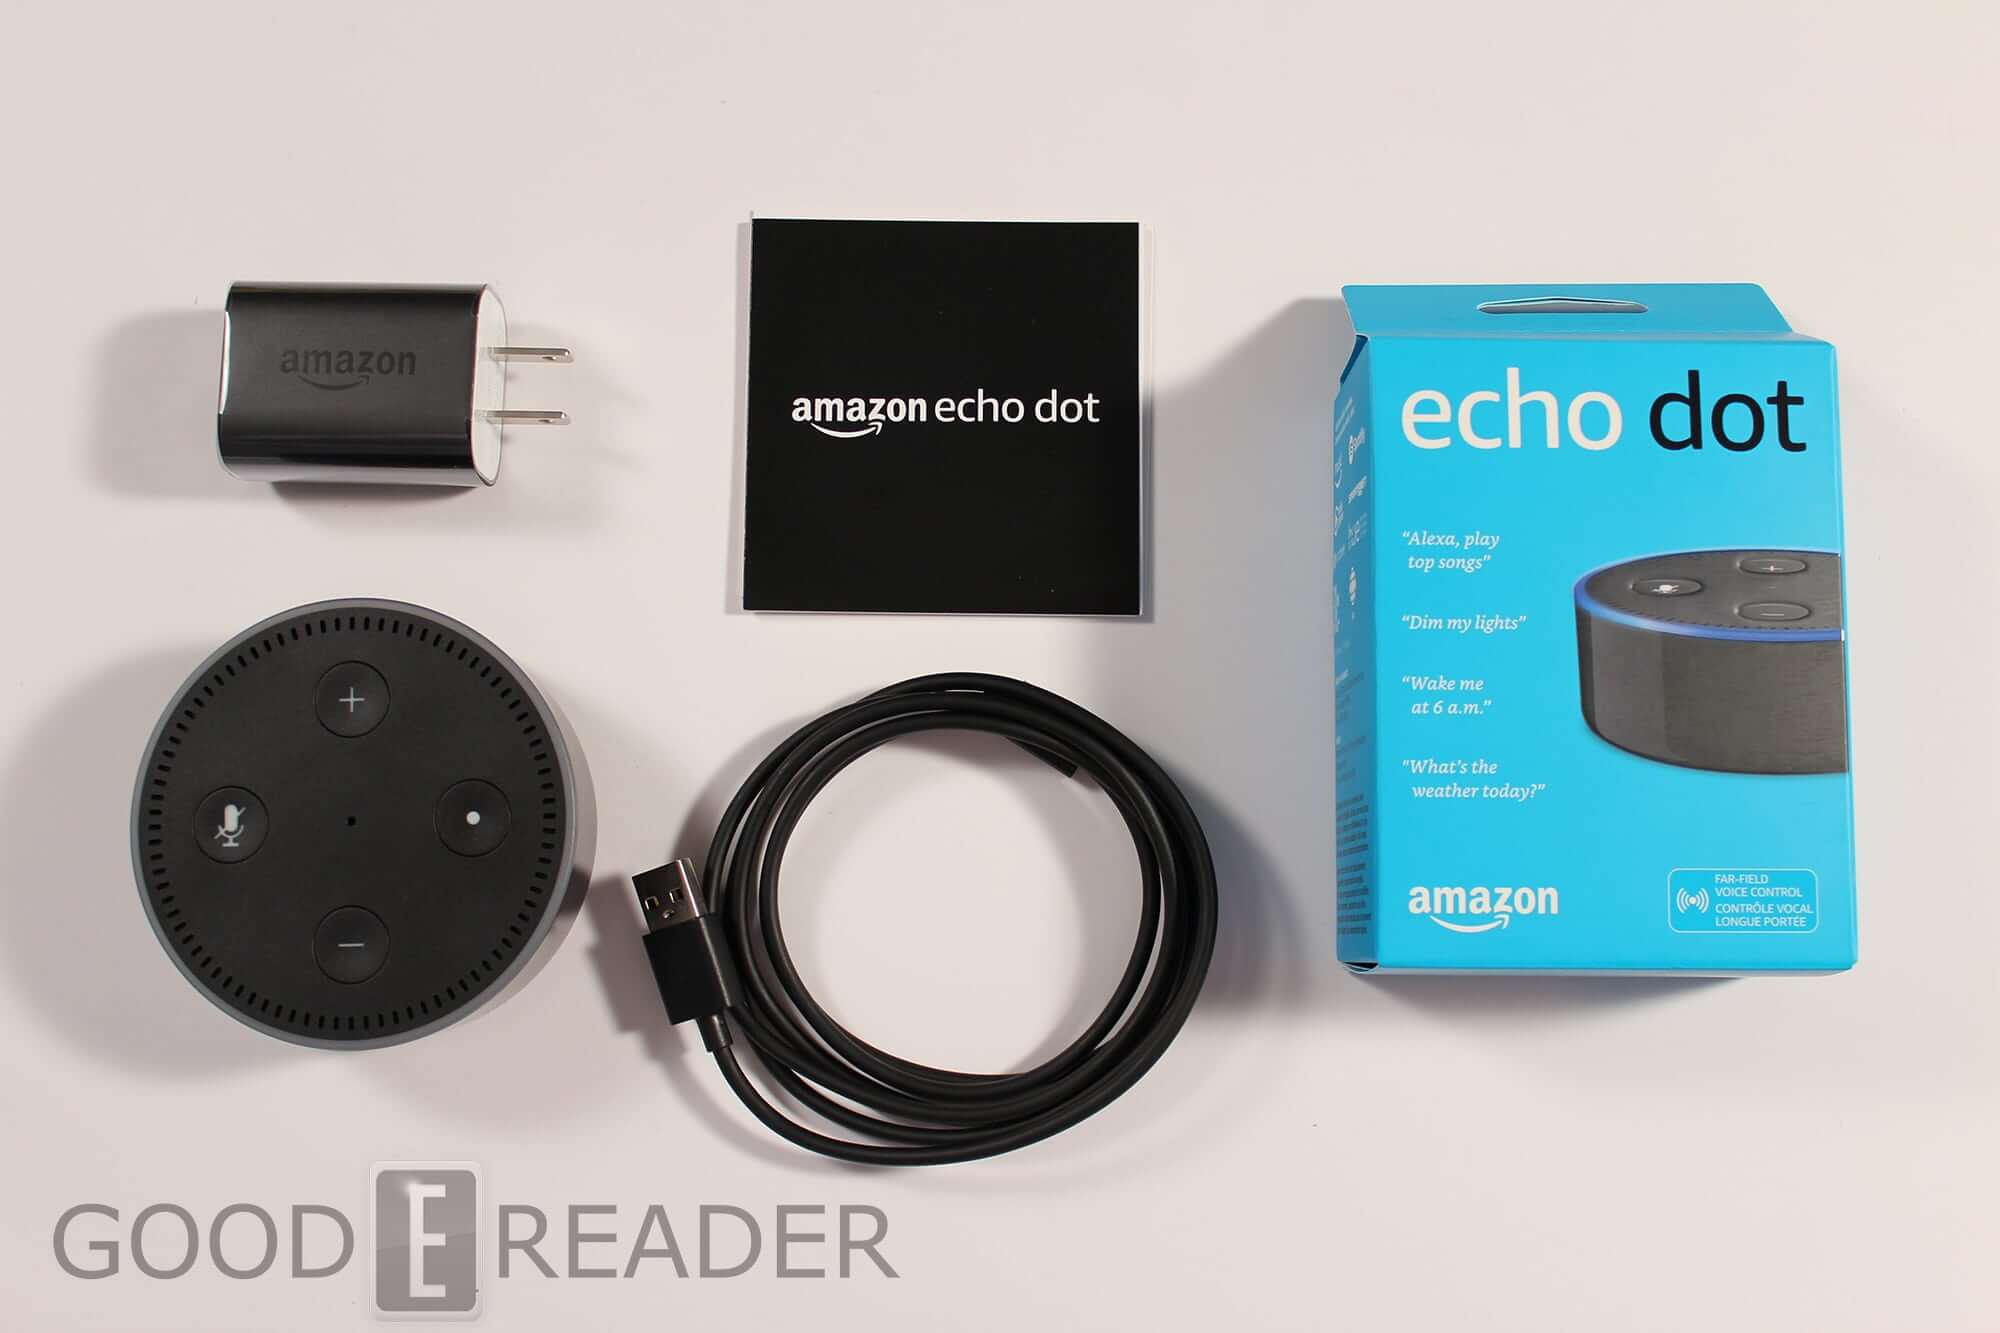 echo dot what's in the box